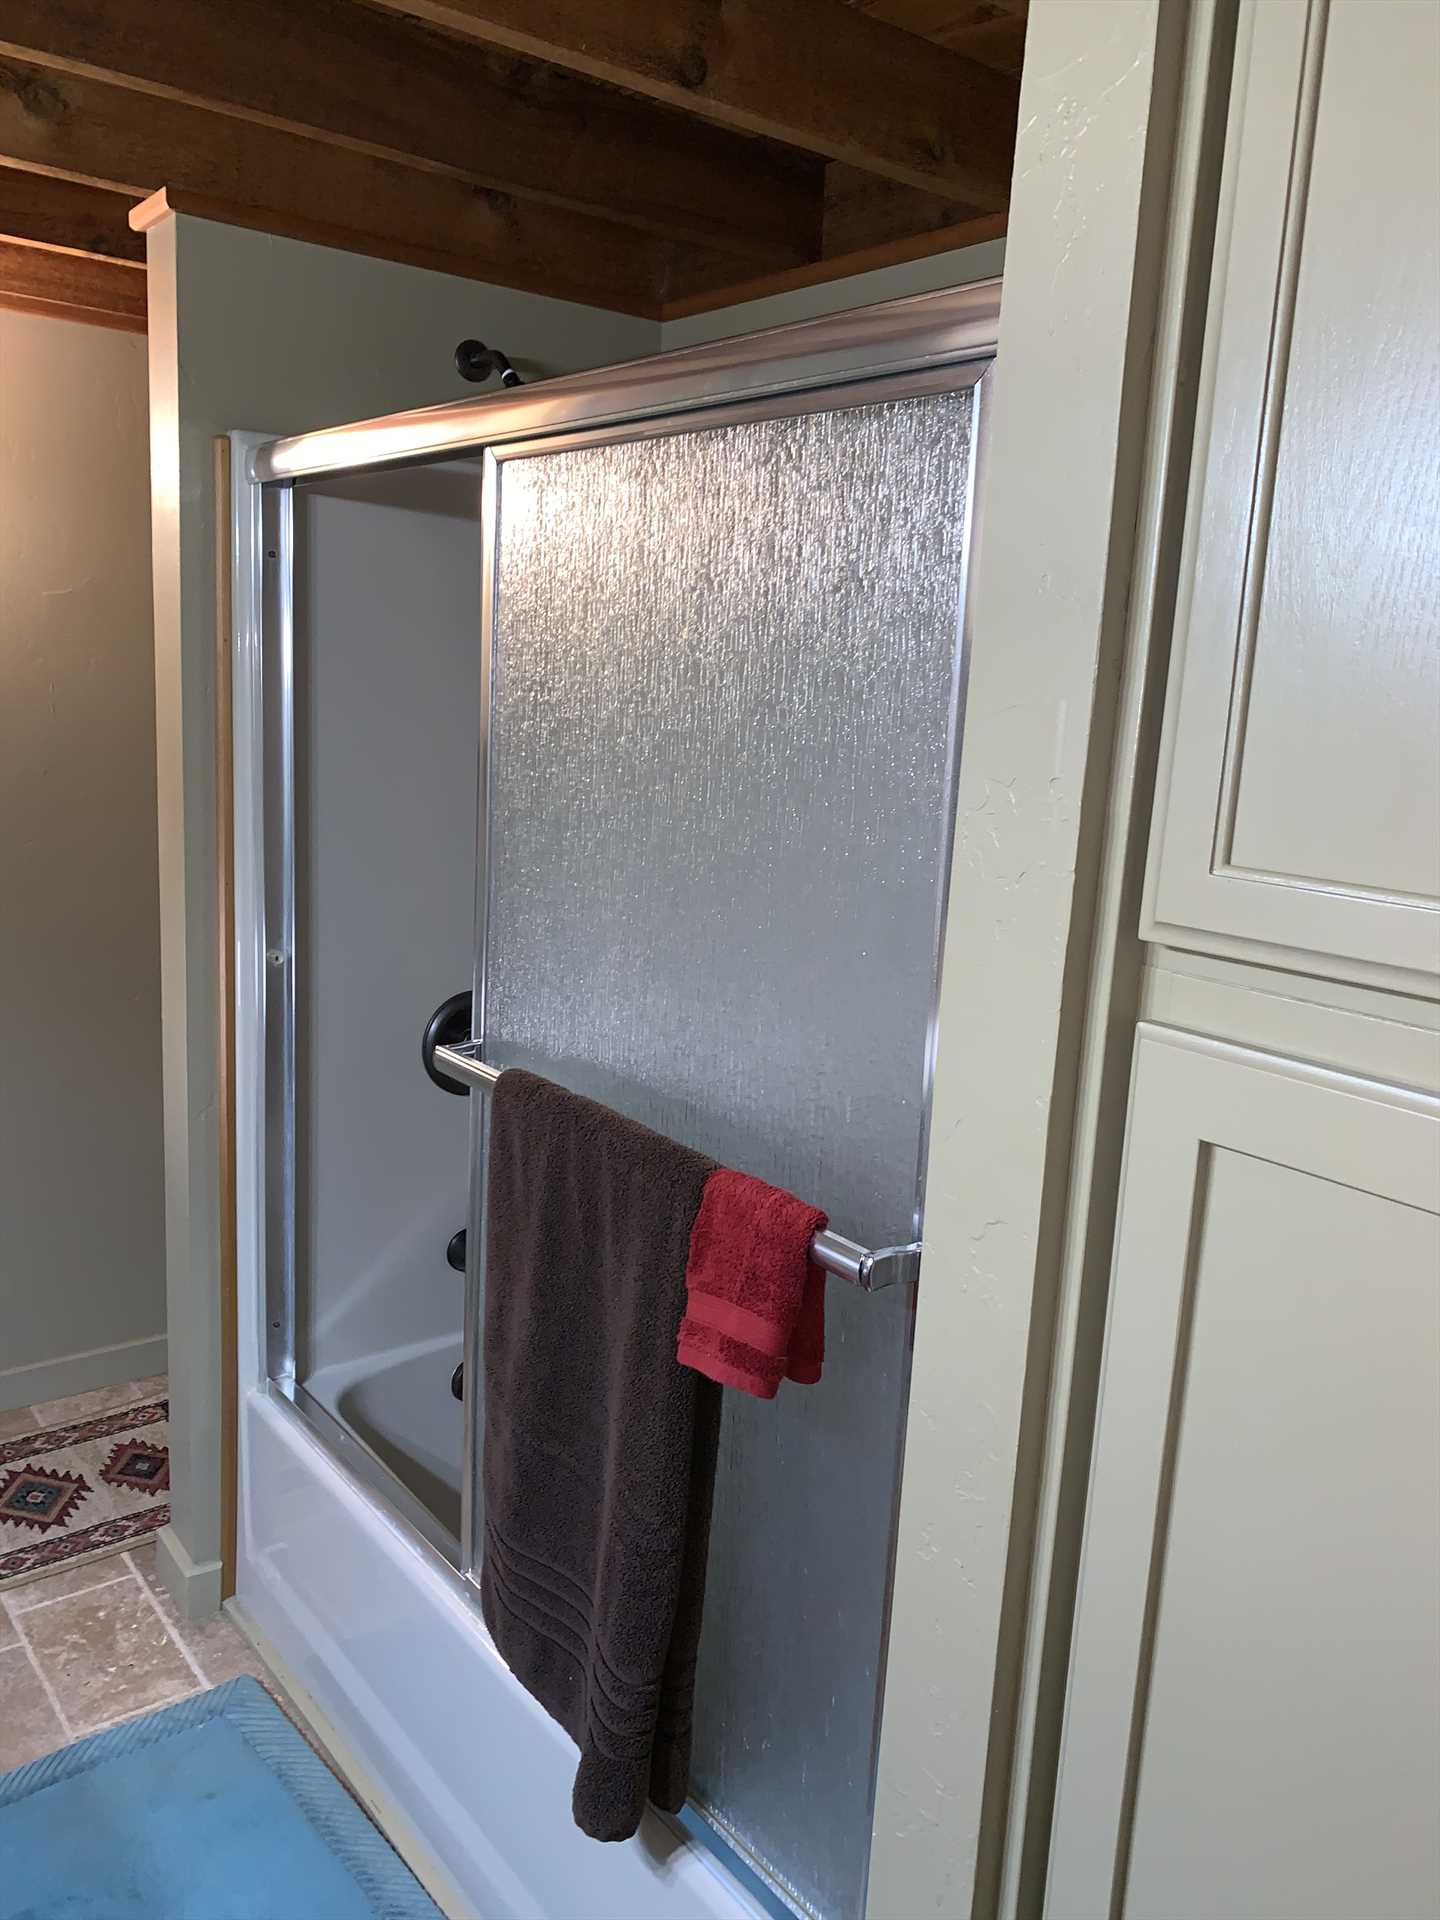                                                 A clean and modern tub and shower combo make cleanup a pleasure!